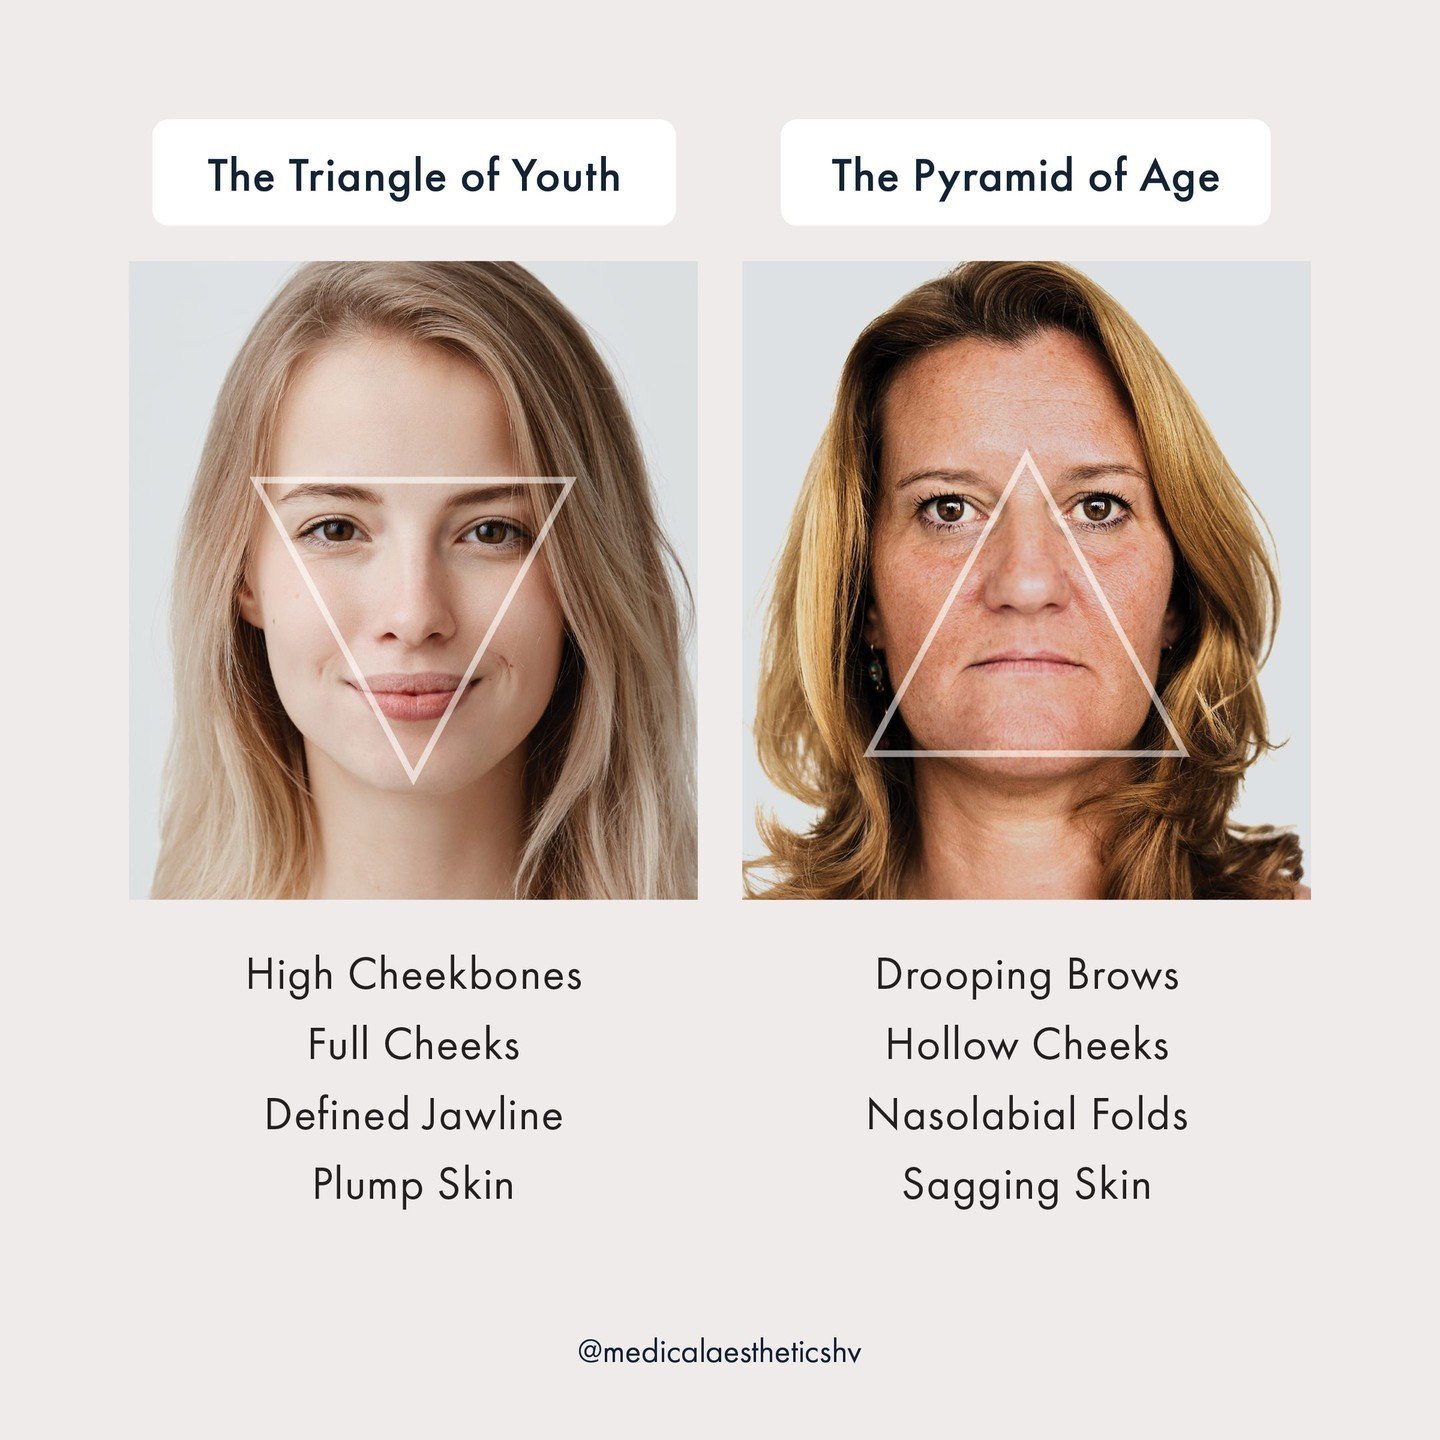 RESTORE YOUR GLOW WITH BIOSTIMULATORS, FILLERS AND THREADS 🤩 Facial contouring can help rebuild volume in the mid-face and restore the triangle of youth. The triangle of youth becomes inverted with age due to tissue laxity. As we lose some of our fa